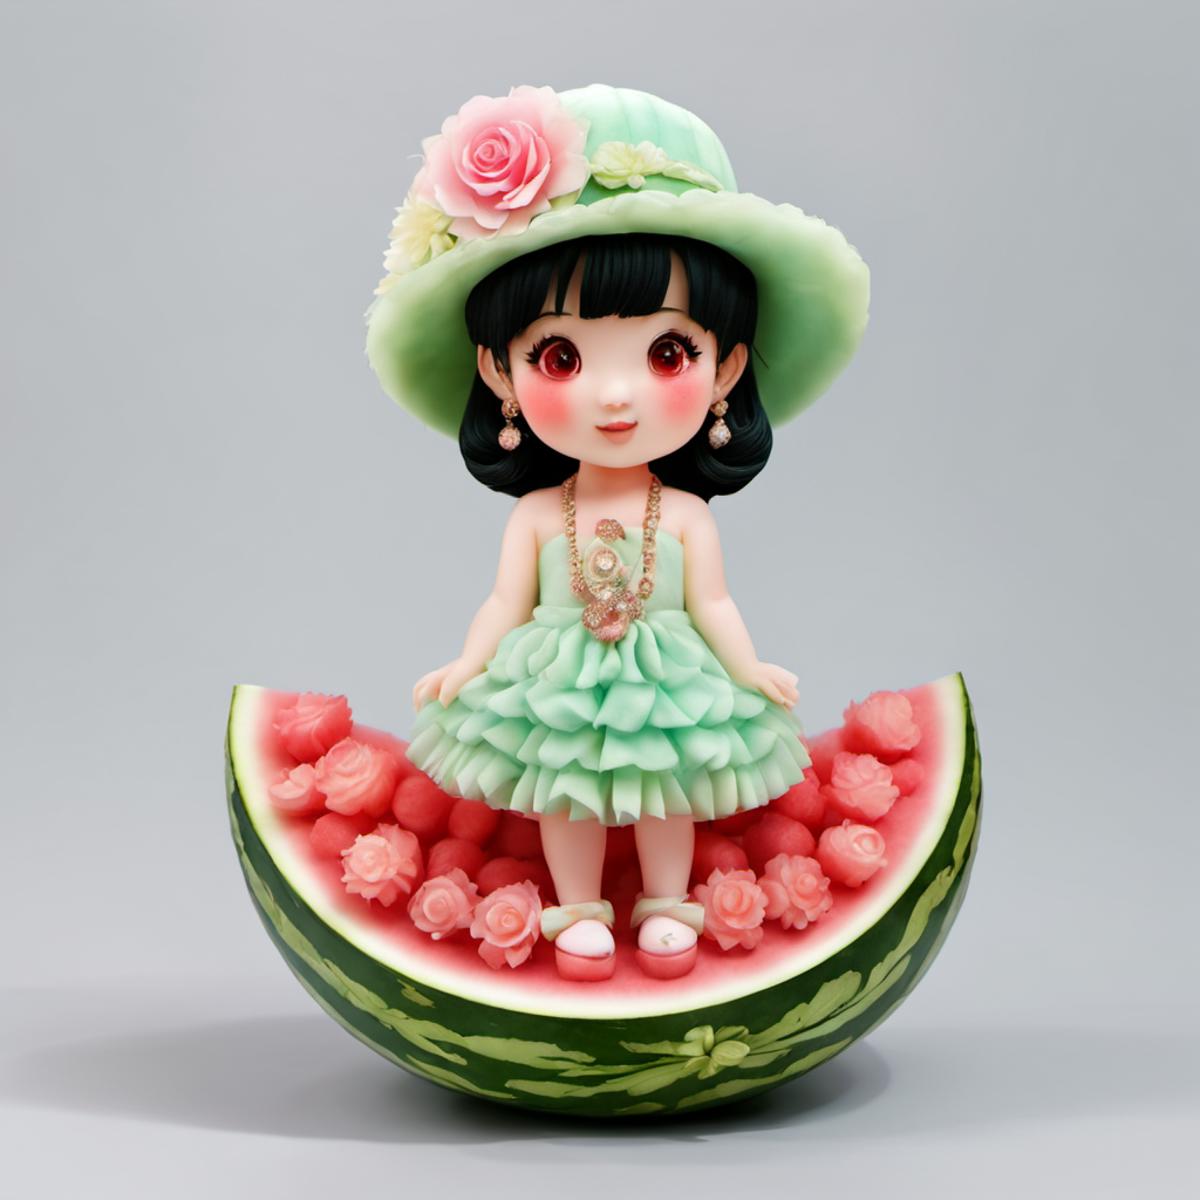 watermeloncarvingSDXL image by chirenshuomeng